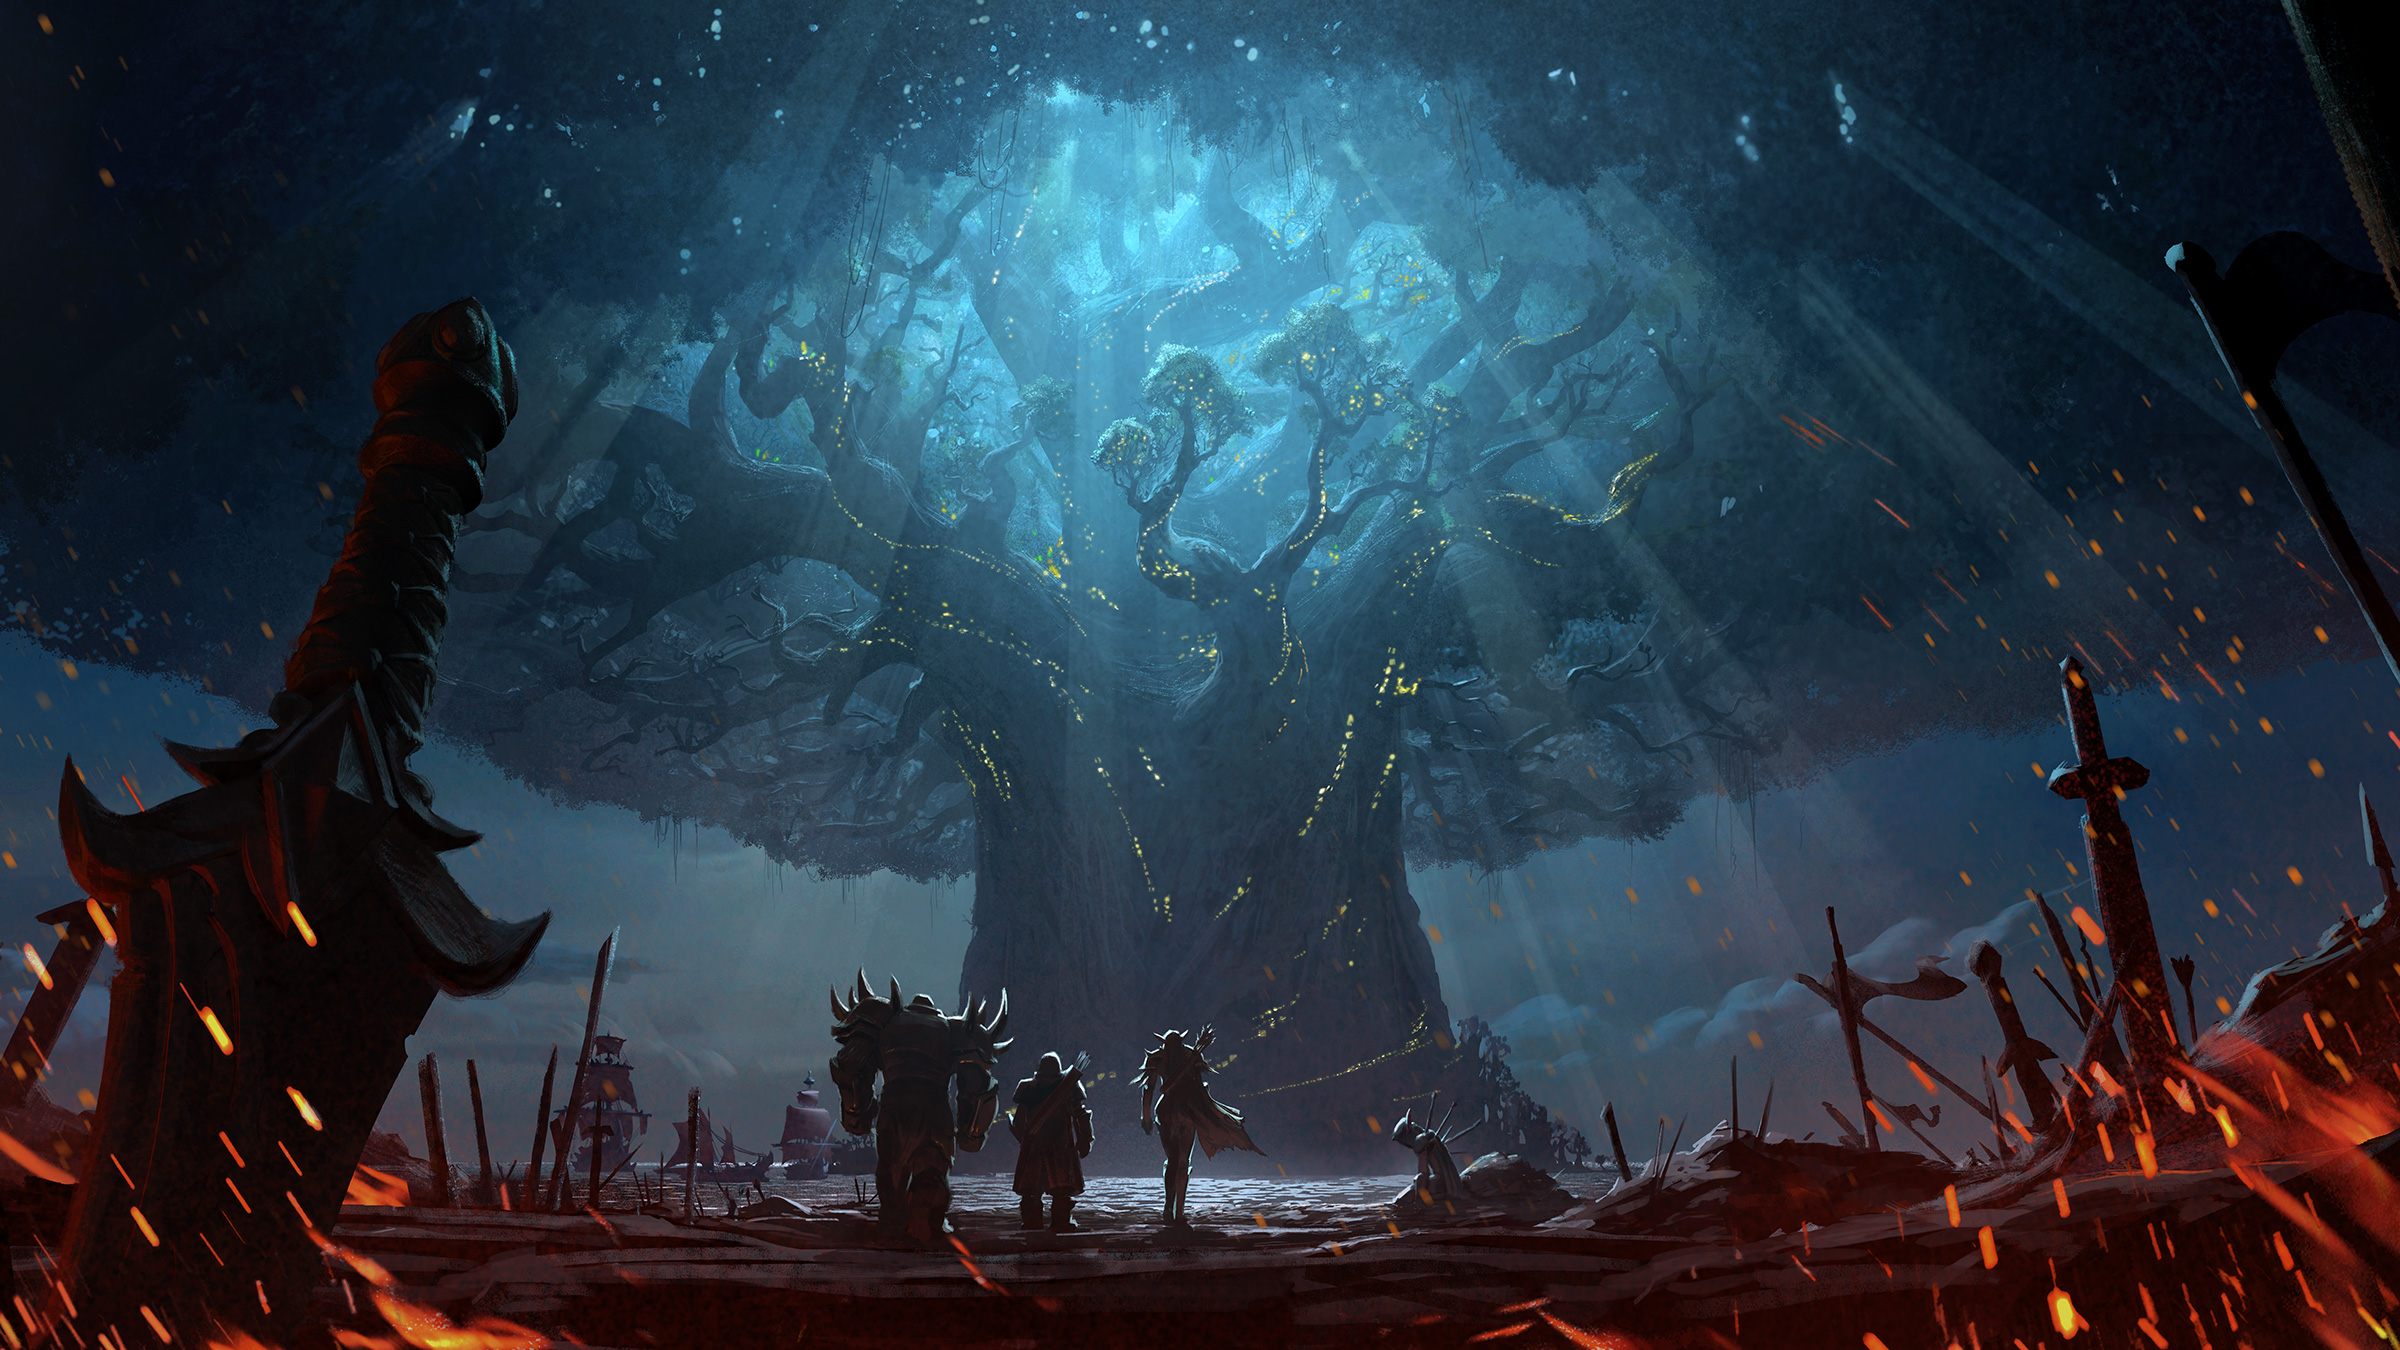 World of Warcraft; Battle for Azeroth - the Burning of Teldrassil